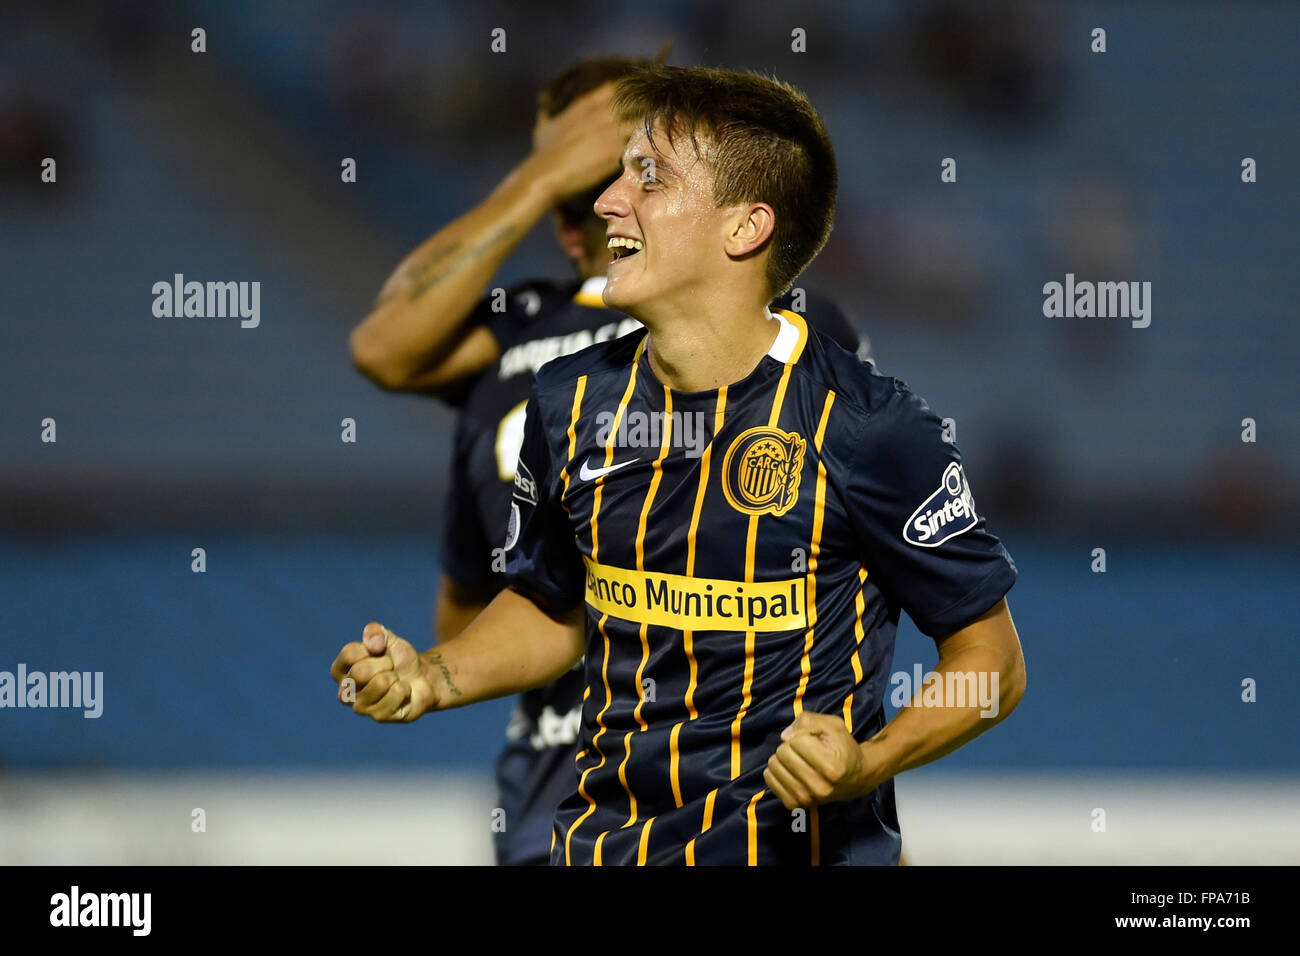 Montevideo, Uruguay. 17th Mar, 2106. Franco Cervi of Argentina's Rosario Central celebrates after scoring during the Group 2 match of the Libertadores Cup, against Uruguay's River Plate, held at Centenario Stadium in Montevideo, capital of Uruguay, on March 17, 2106. Rosario Central won by 3-1. © Nicolas Celaya/Xinhua/Alamy Live News Stock Photo